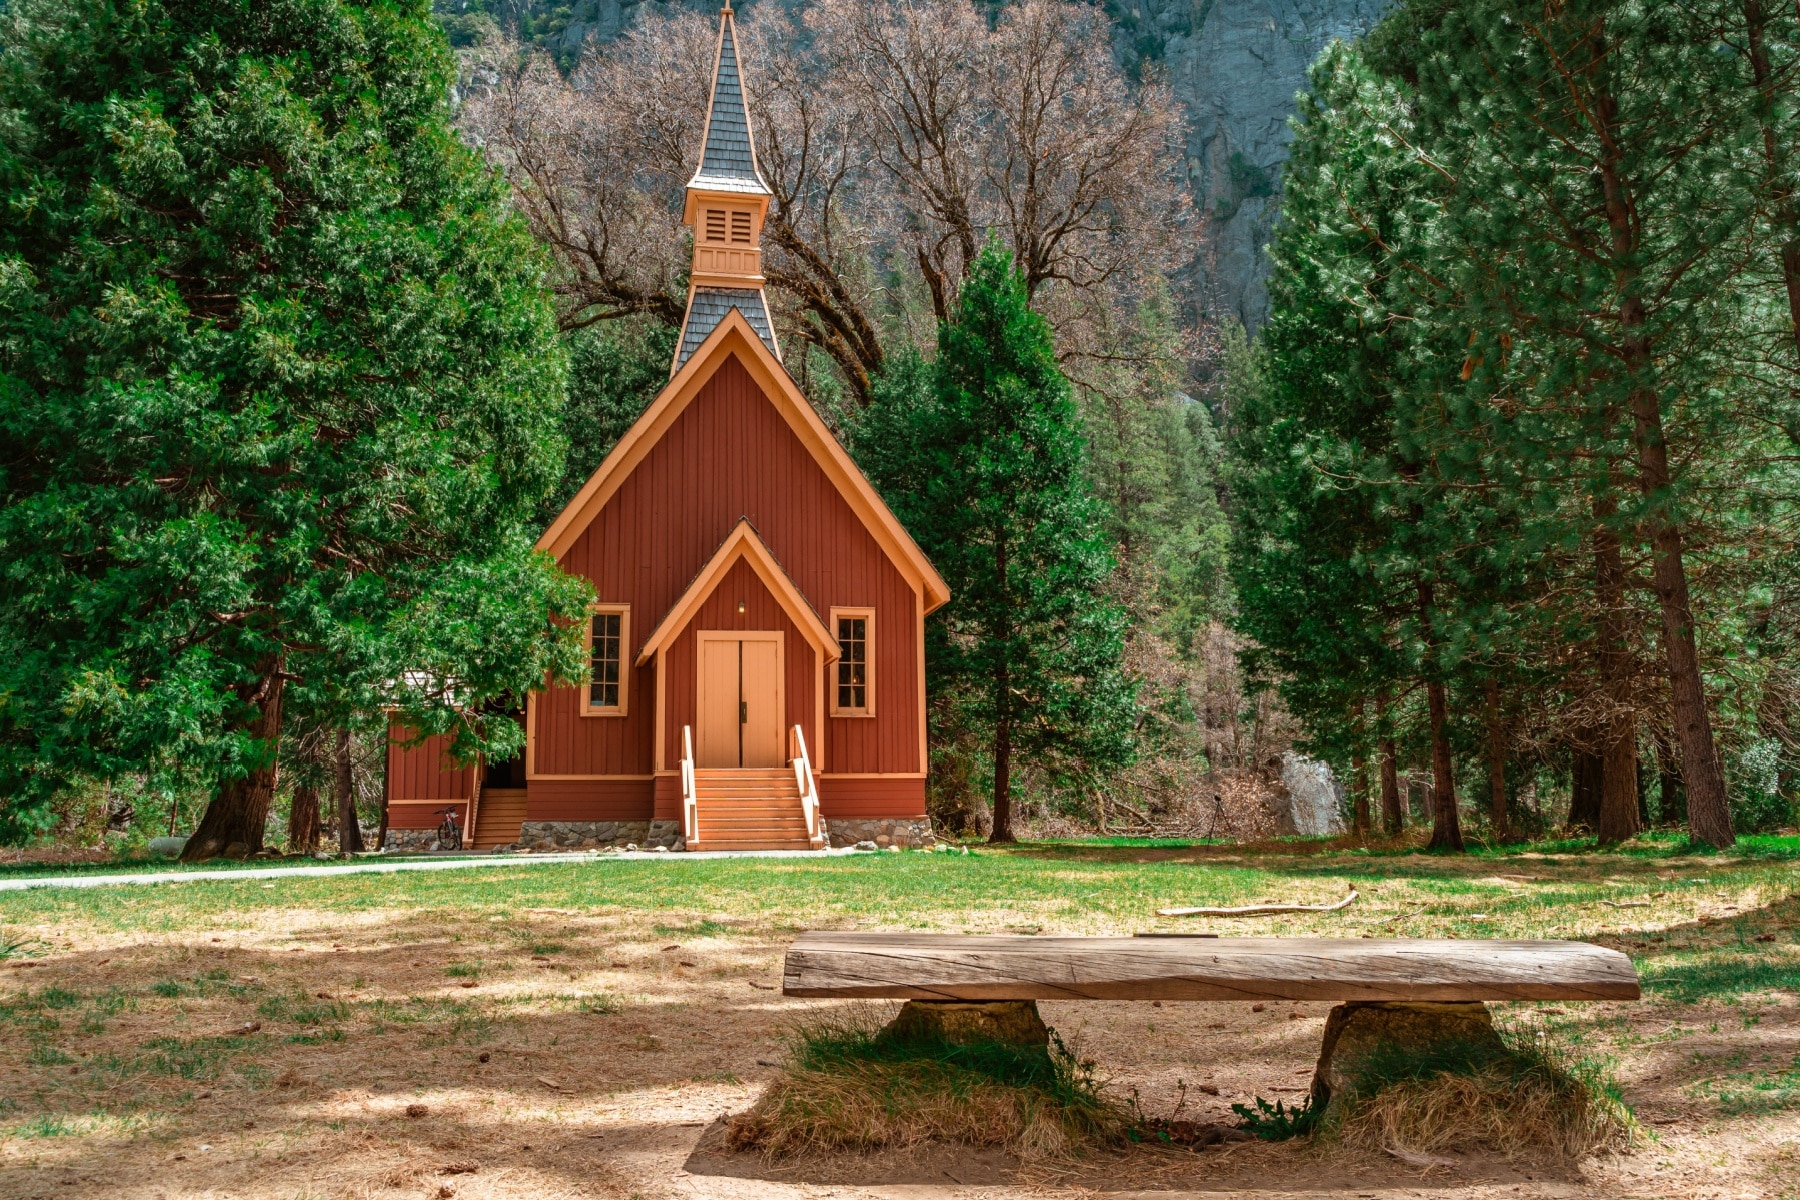 Yosemite Valley Chapel is one option for a national park wedding